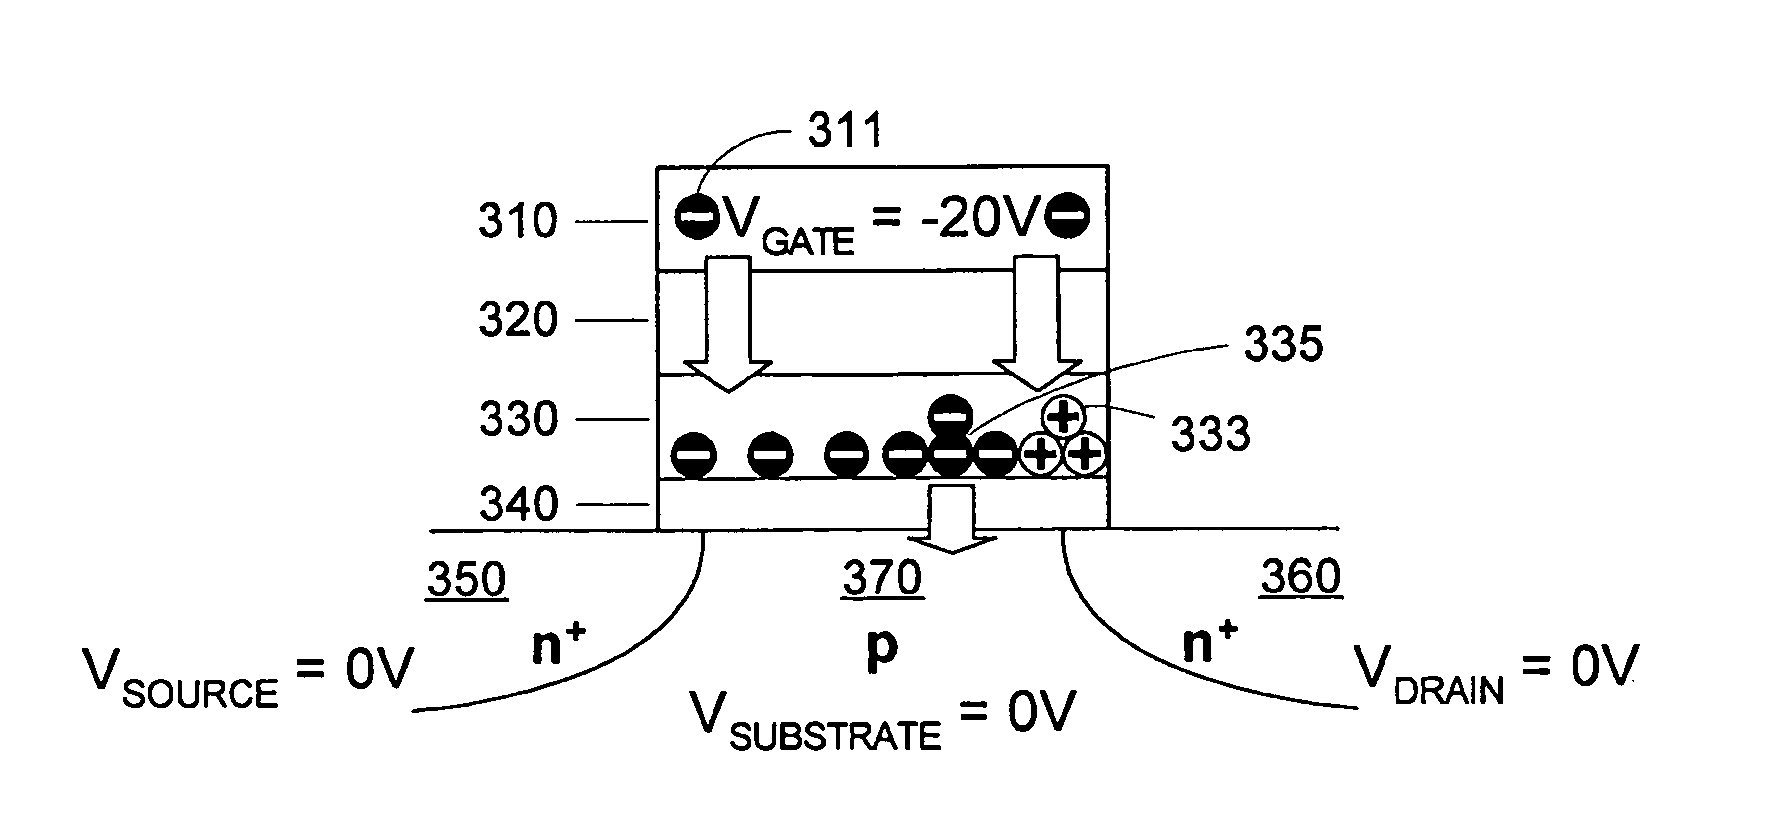 Operation scheme with charge balancing erase for charge trapping non-volatile memory